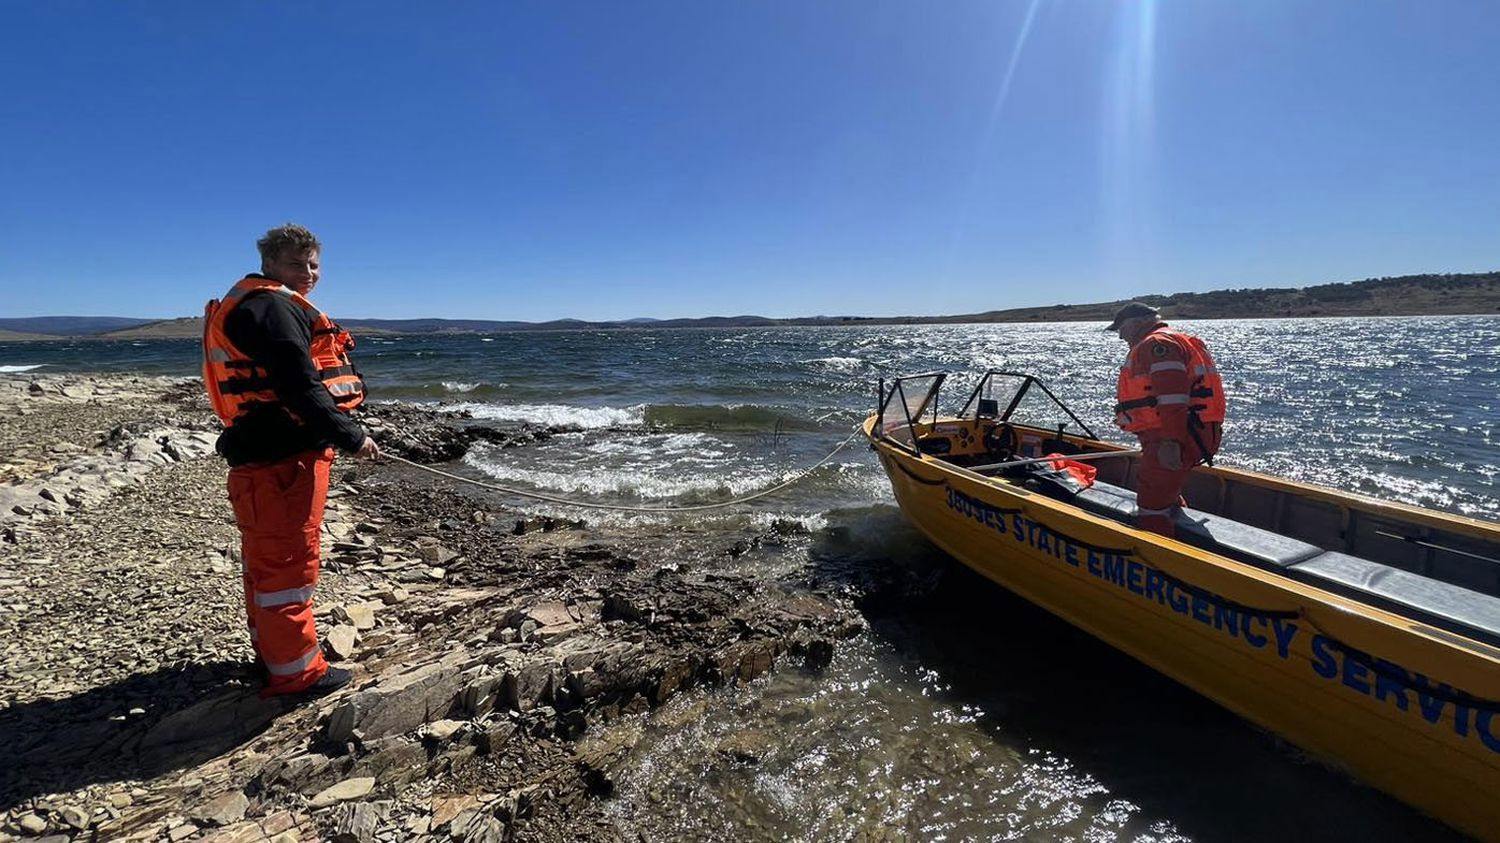 A second body has been found after two fishermen were reported missing in the New South Wales Snowy Mountains earlier this week.Police were told two men, both aged 73, had not returned after fishing in ﻿Lake Eucumbene near Adaminaby on September 6.
Authorities launched search operation of the waterway and nearby bushland involving divers, NSW Marine Rescue, SES volunteers and aircraft.﻿